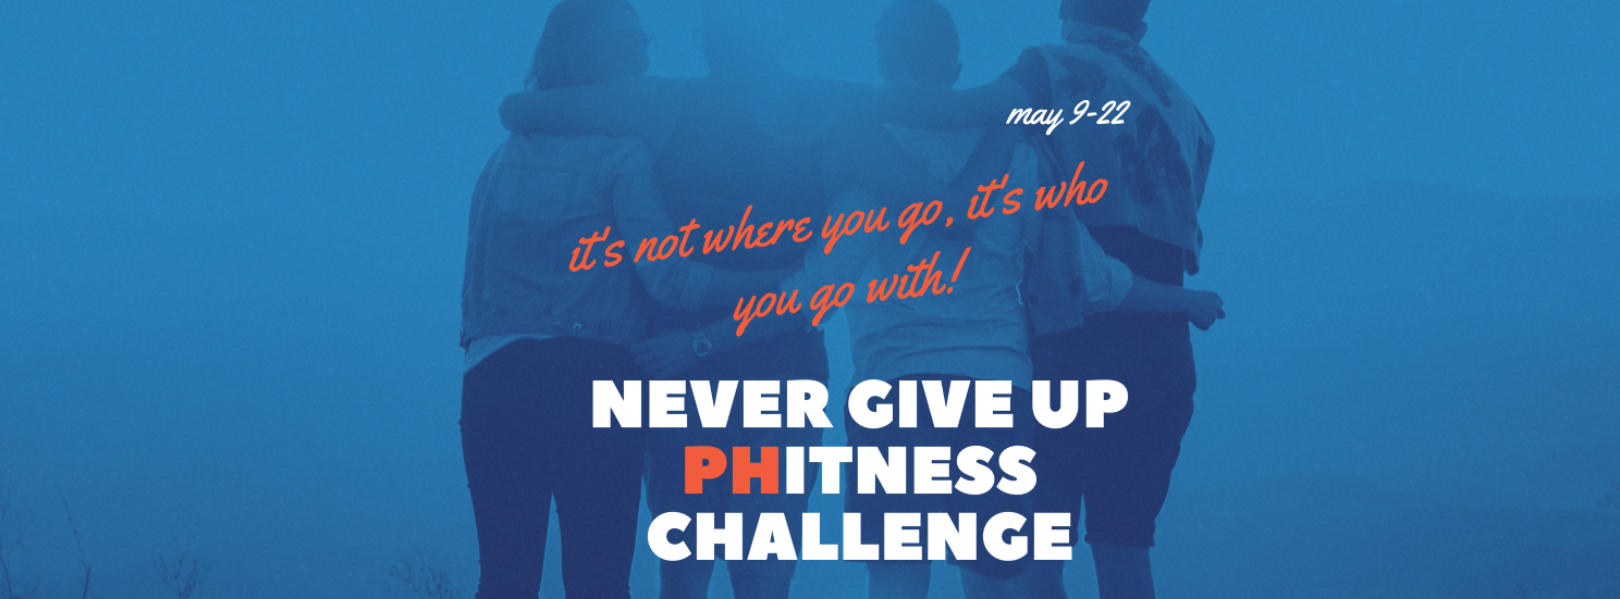 Never Give Up Phitness Challenge